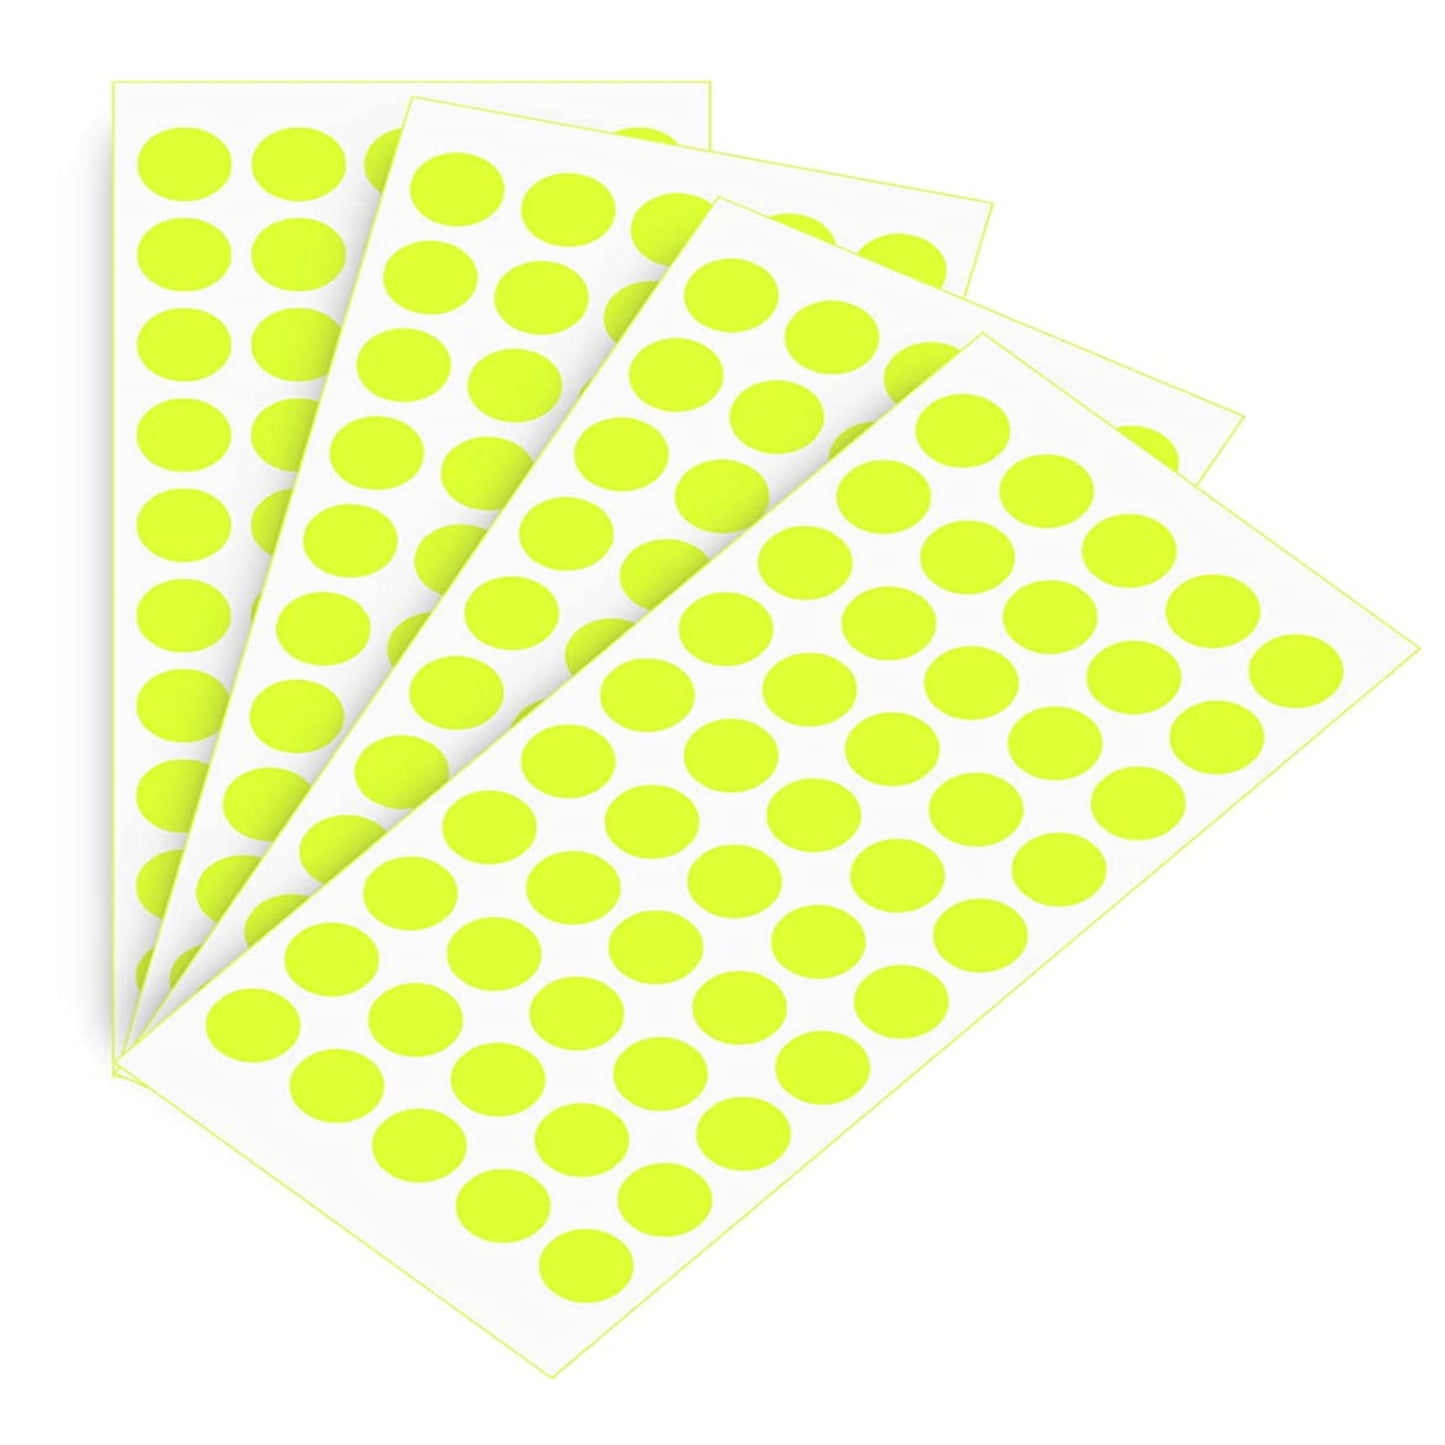 AccuPrints Neon Coloured Round Dots 10-mm or 1 cm or 0.37 inch Stickers for Art and Craft & Games